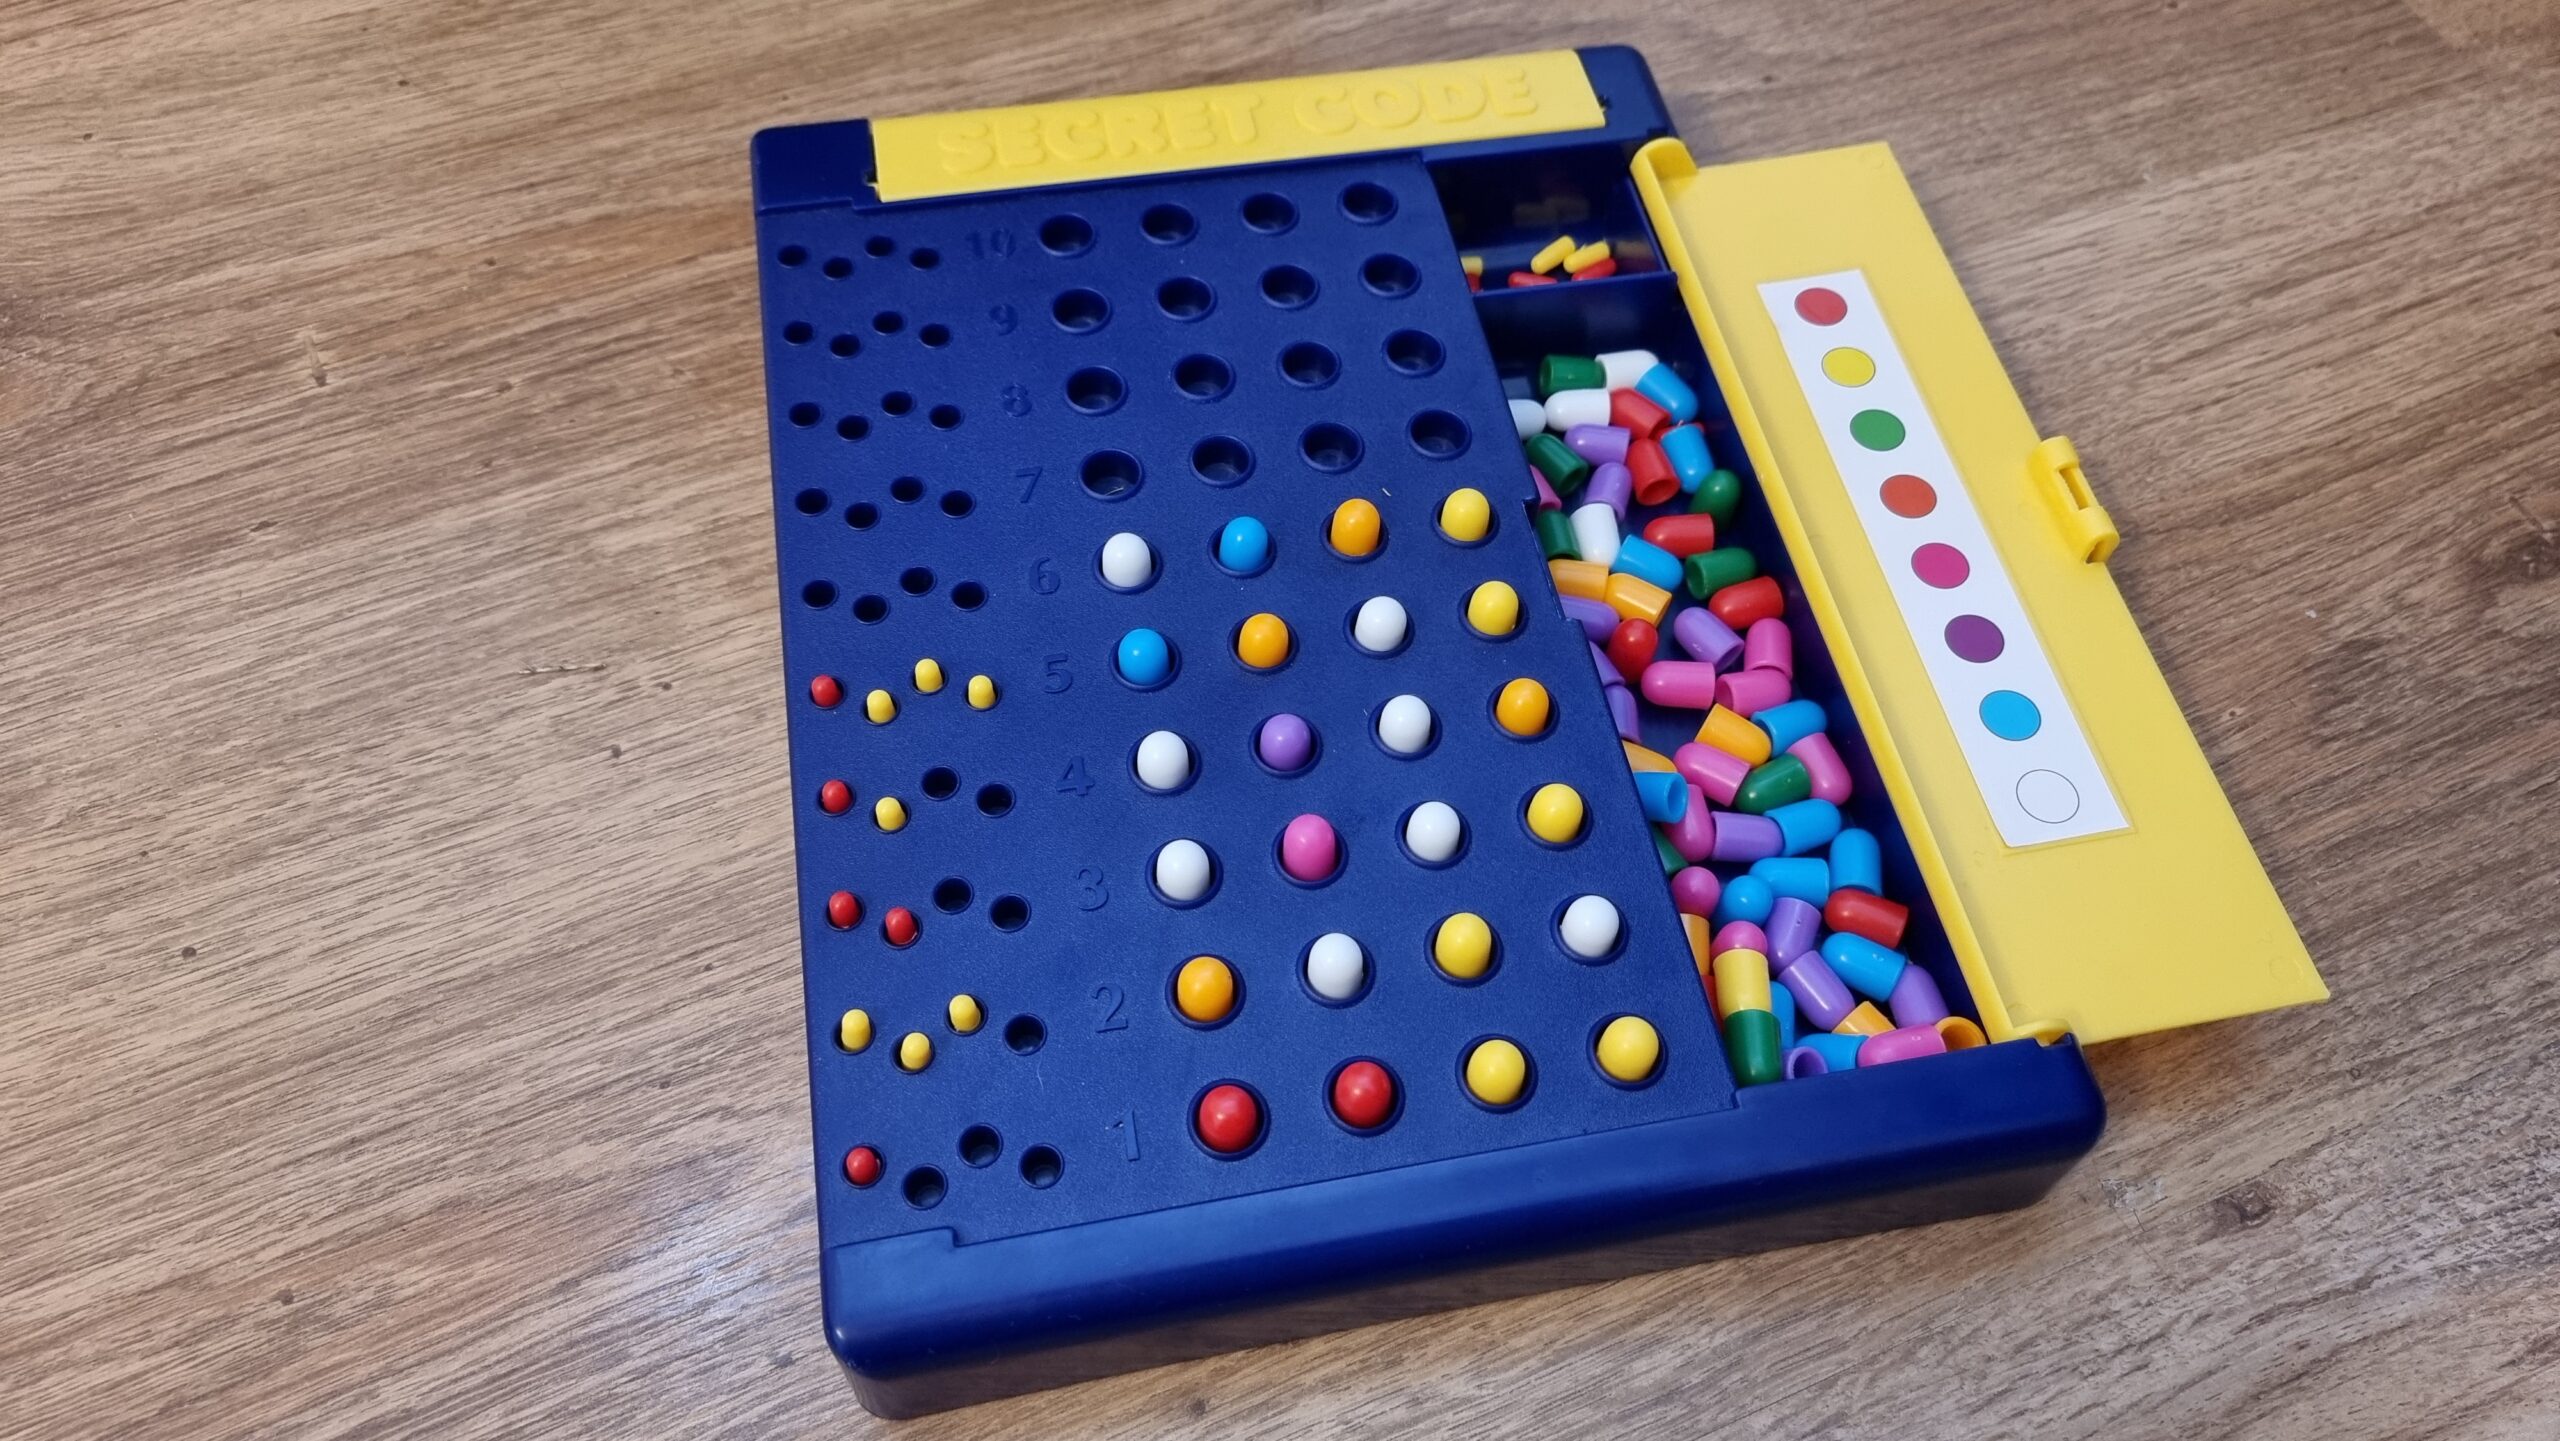 A plastic Mastermind board in blue and yellow with ten guess spaces and eight pegs. The sixth guess is unscored but looks likely to be the valid solution.